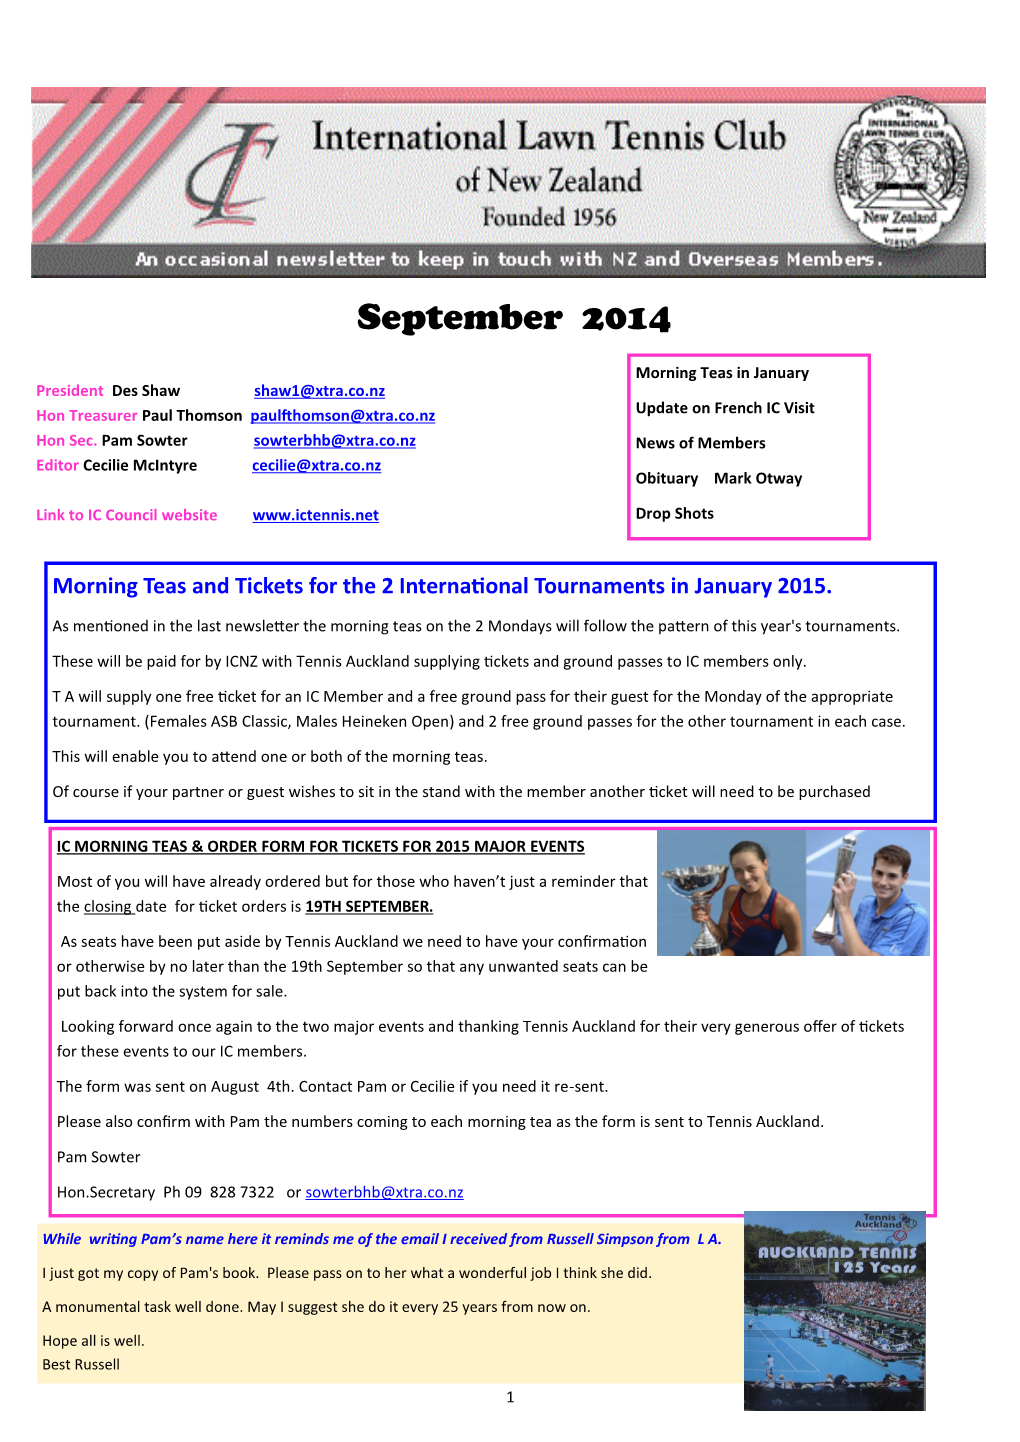 To View the Newsletter